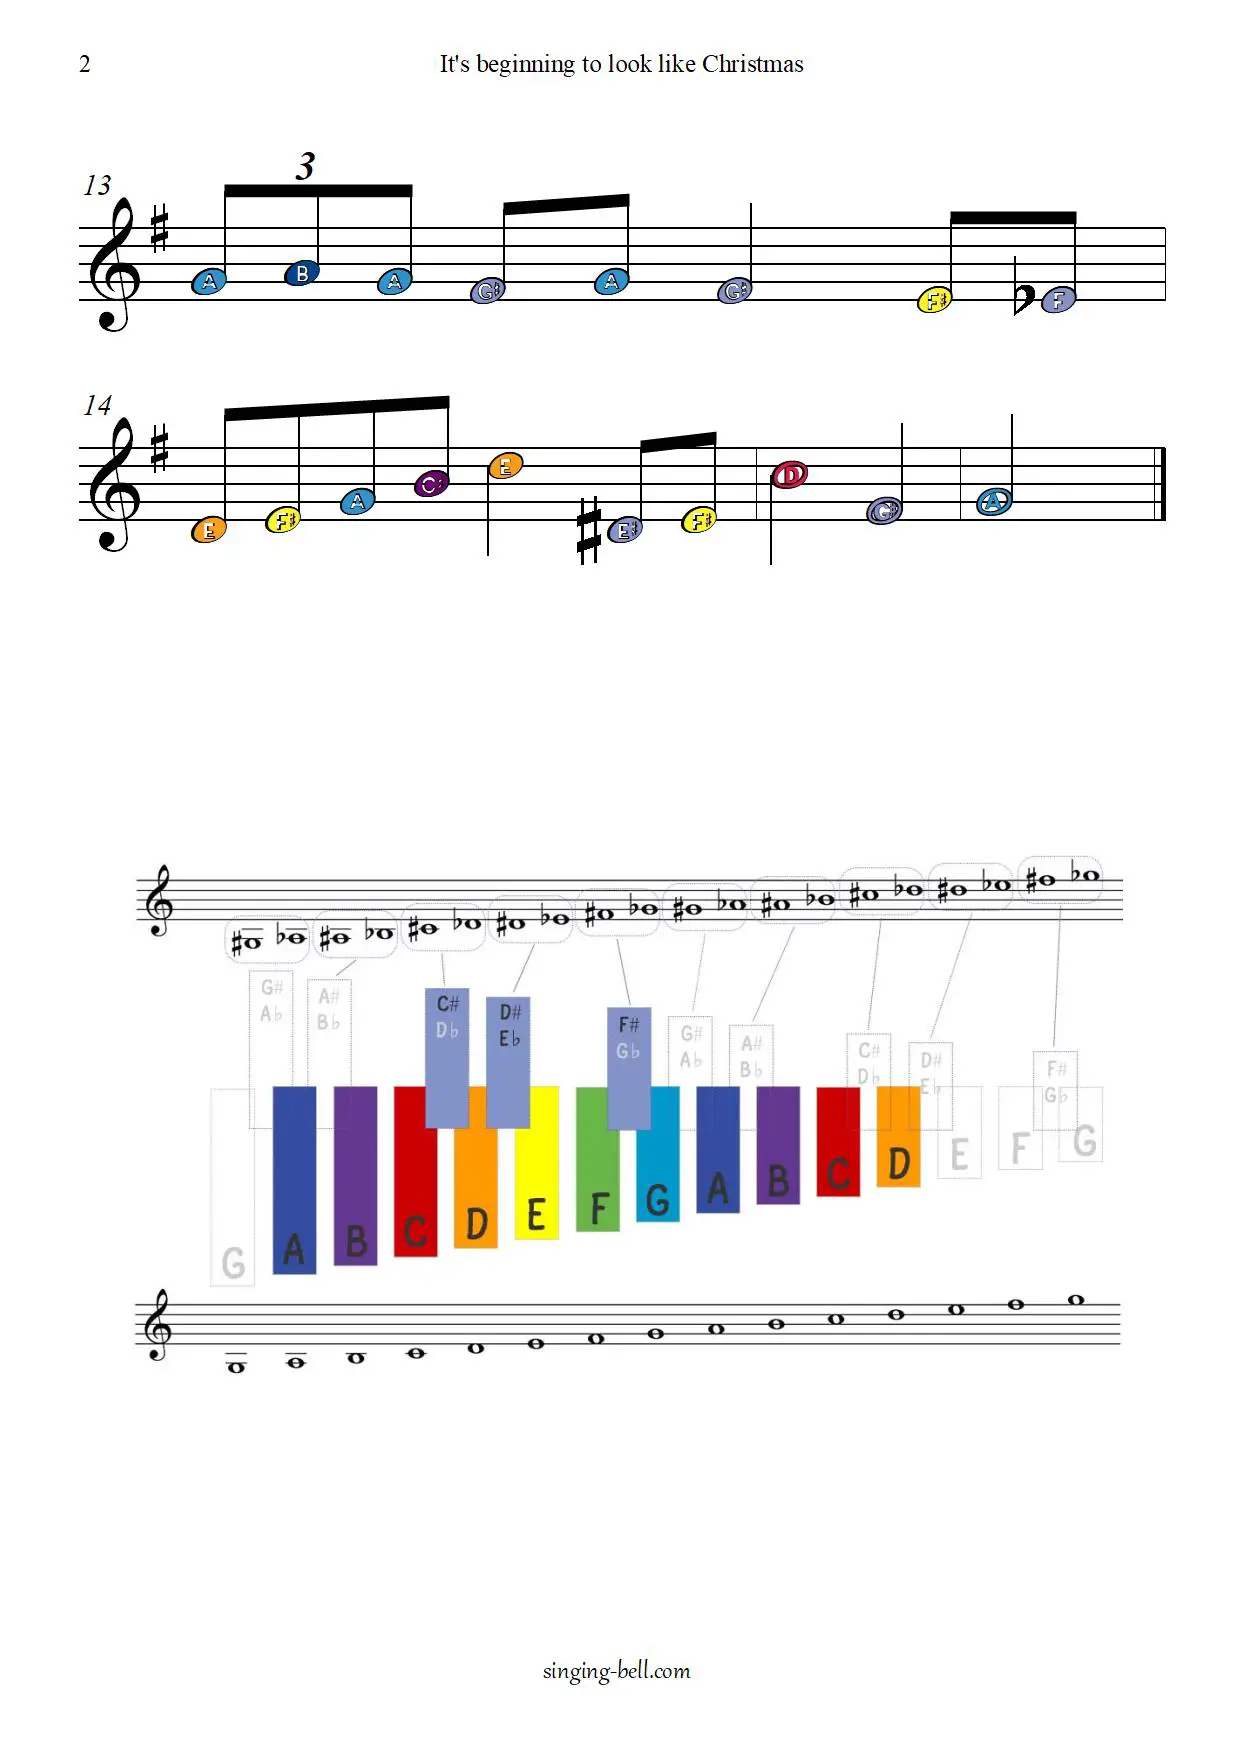 It's beginning to look like Christmas free xylophone glockenspiel sheet music color notes chart pdf p.2